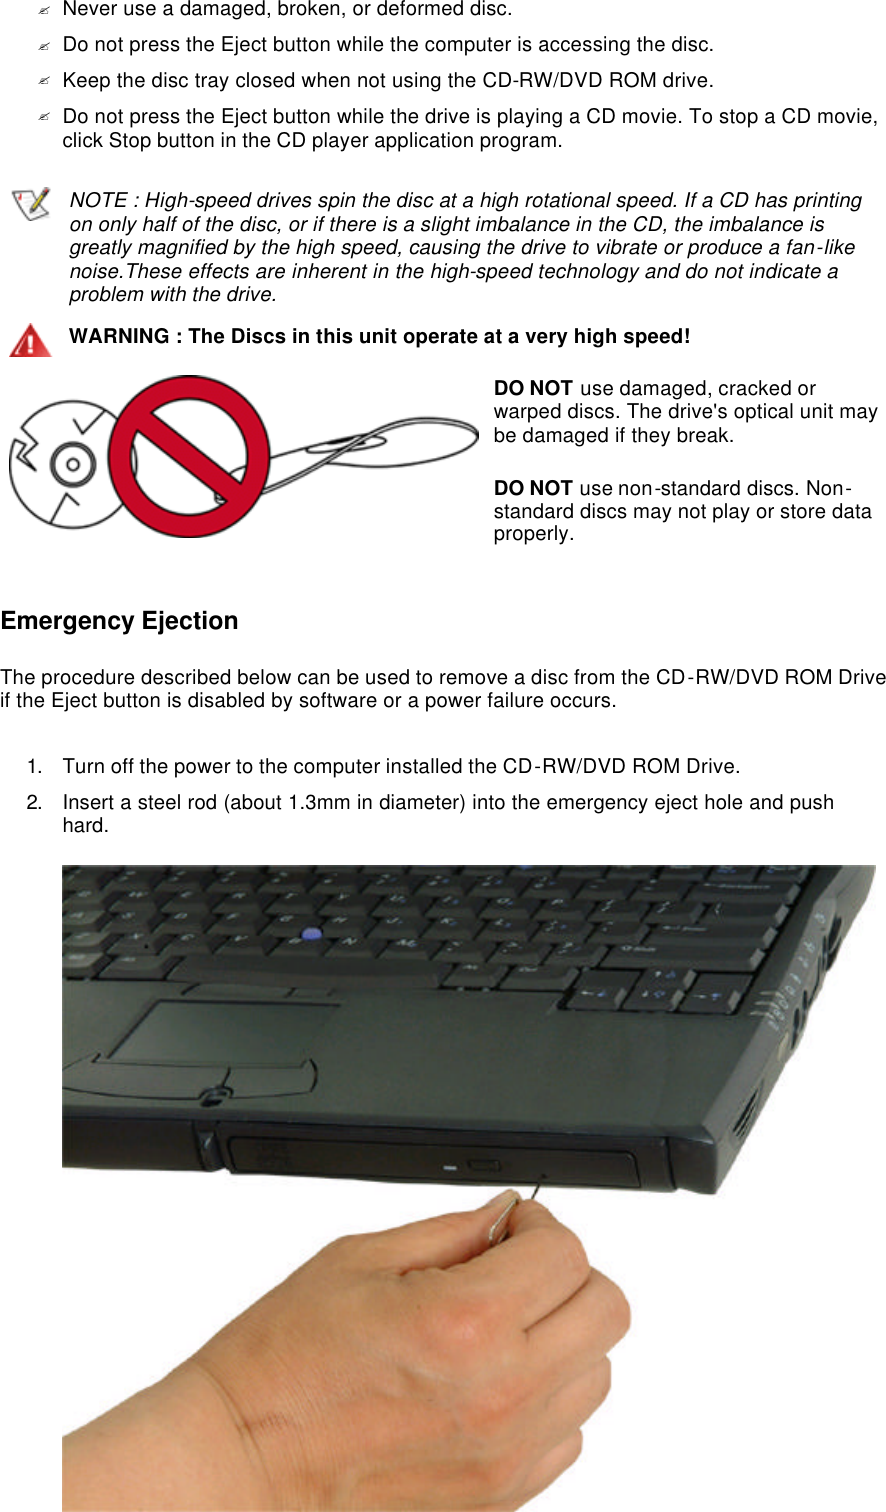 ?Never use a damaged, broken, or deformed disc.  ?Do not press the Eject button while the computer is accessing the disc.  ?Keep the disc tray closed when not using the CD-RW/DVD ROM drive.  ?Do not press the Eject button while the drive is playing a CD movie. To stop a CD movie, click Stop button in the CD player application program.   Emergency Ejection The procedure described below can be used to remove a disc from the CD-RW/DVD ROM Drive if the Eject button is disabled by software or a power failure occurs. 1. Turn off the power to the computer installed the CD-RW/DVD ROM Drive.  2. Insert a steel rod (about 1.3mm in diameter) into the emergency eject hole and push hard.   NOTE : High-speed drives spin the disc at a high rotational speed. If a CD has printing on only half of the disc, or if there is a slight imbalance in the CD, the imbalance is greatly magnified by the high speed, causing the drive to vibrate or produce a fan-like noise.These effects are inherent in the high-speed technology and do not indicate a problem with the drive.WARNING : The Discs in this unit operate at a very high speed!DO NOT use damaged, cracked or warped discs. The drive&apos;s optical unit may be damaged if they break. DO NOT use non-standard discs. Non-standard discs may not play or store data properly. 